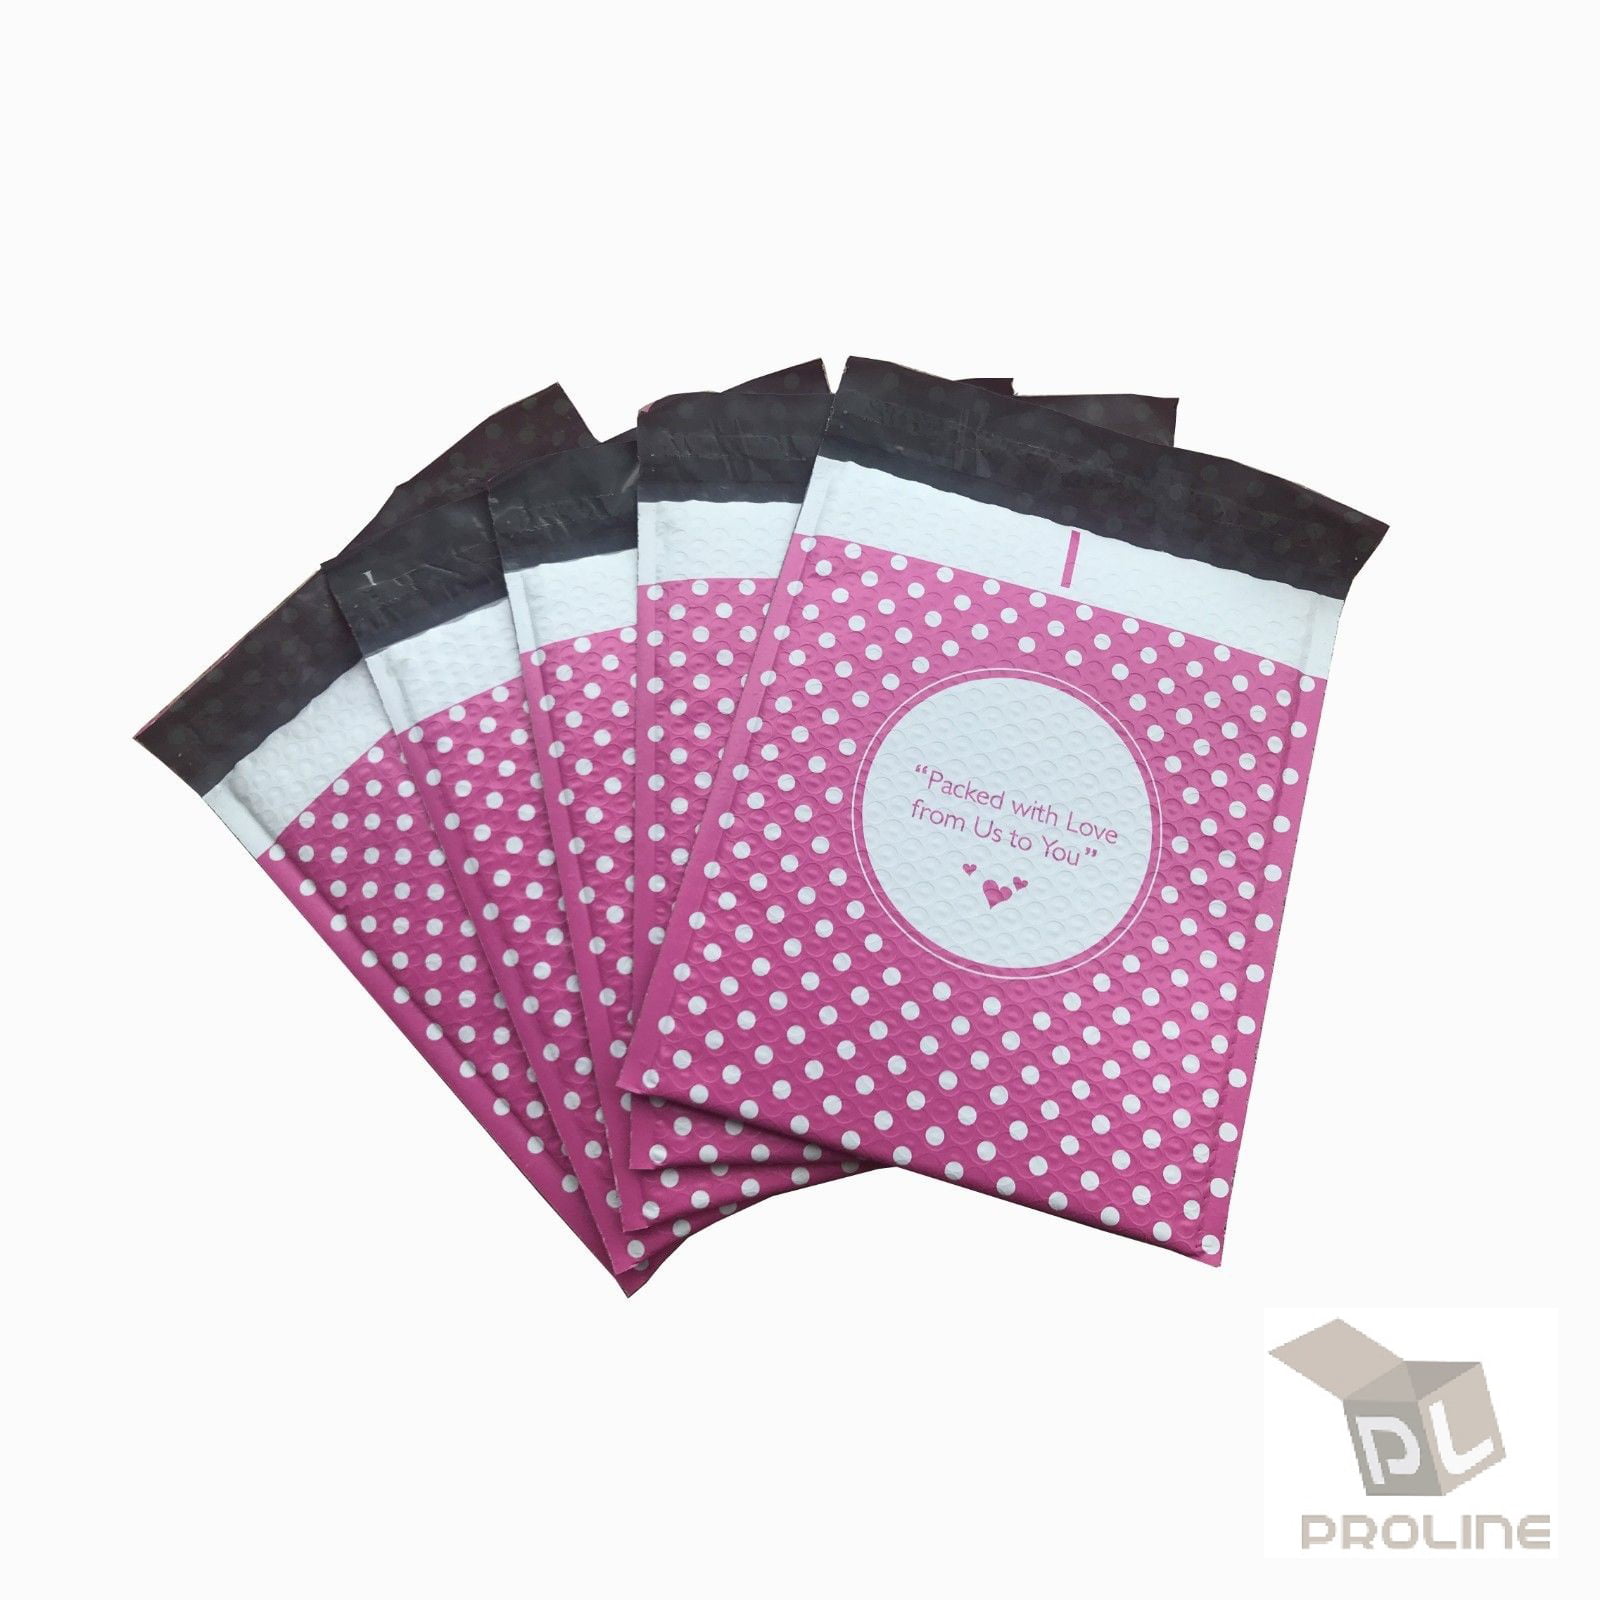 250 #0 6x9 Packed with Love from Us to You Pink Dot Poly Bubble Mailers 